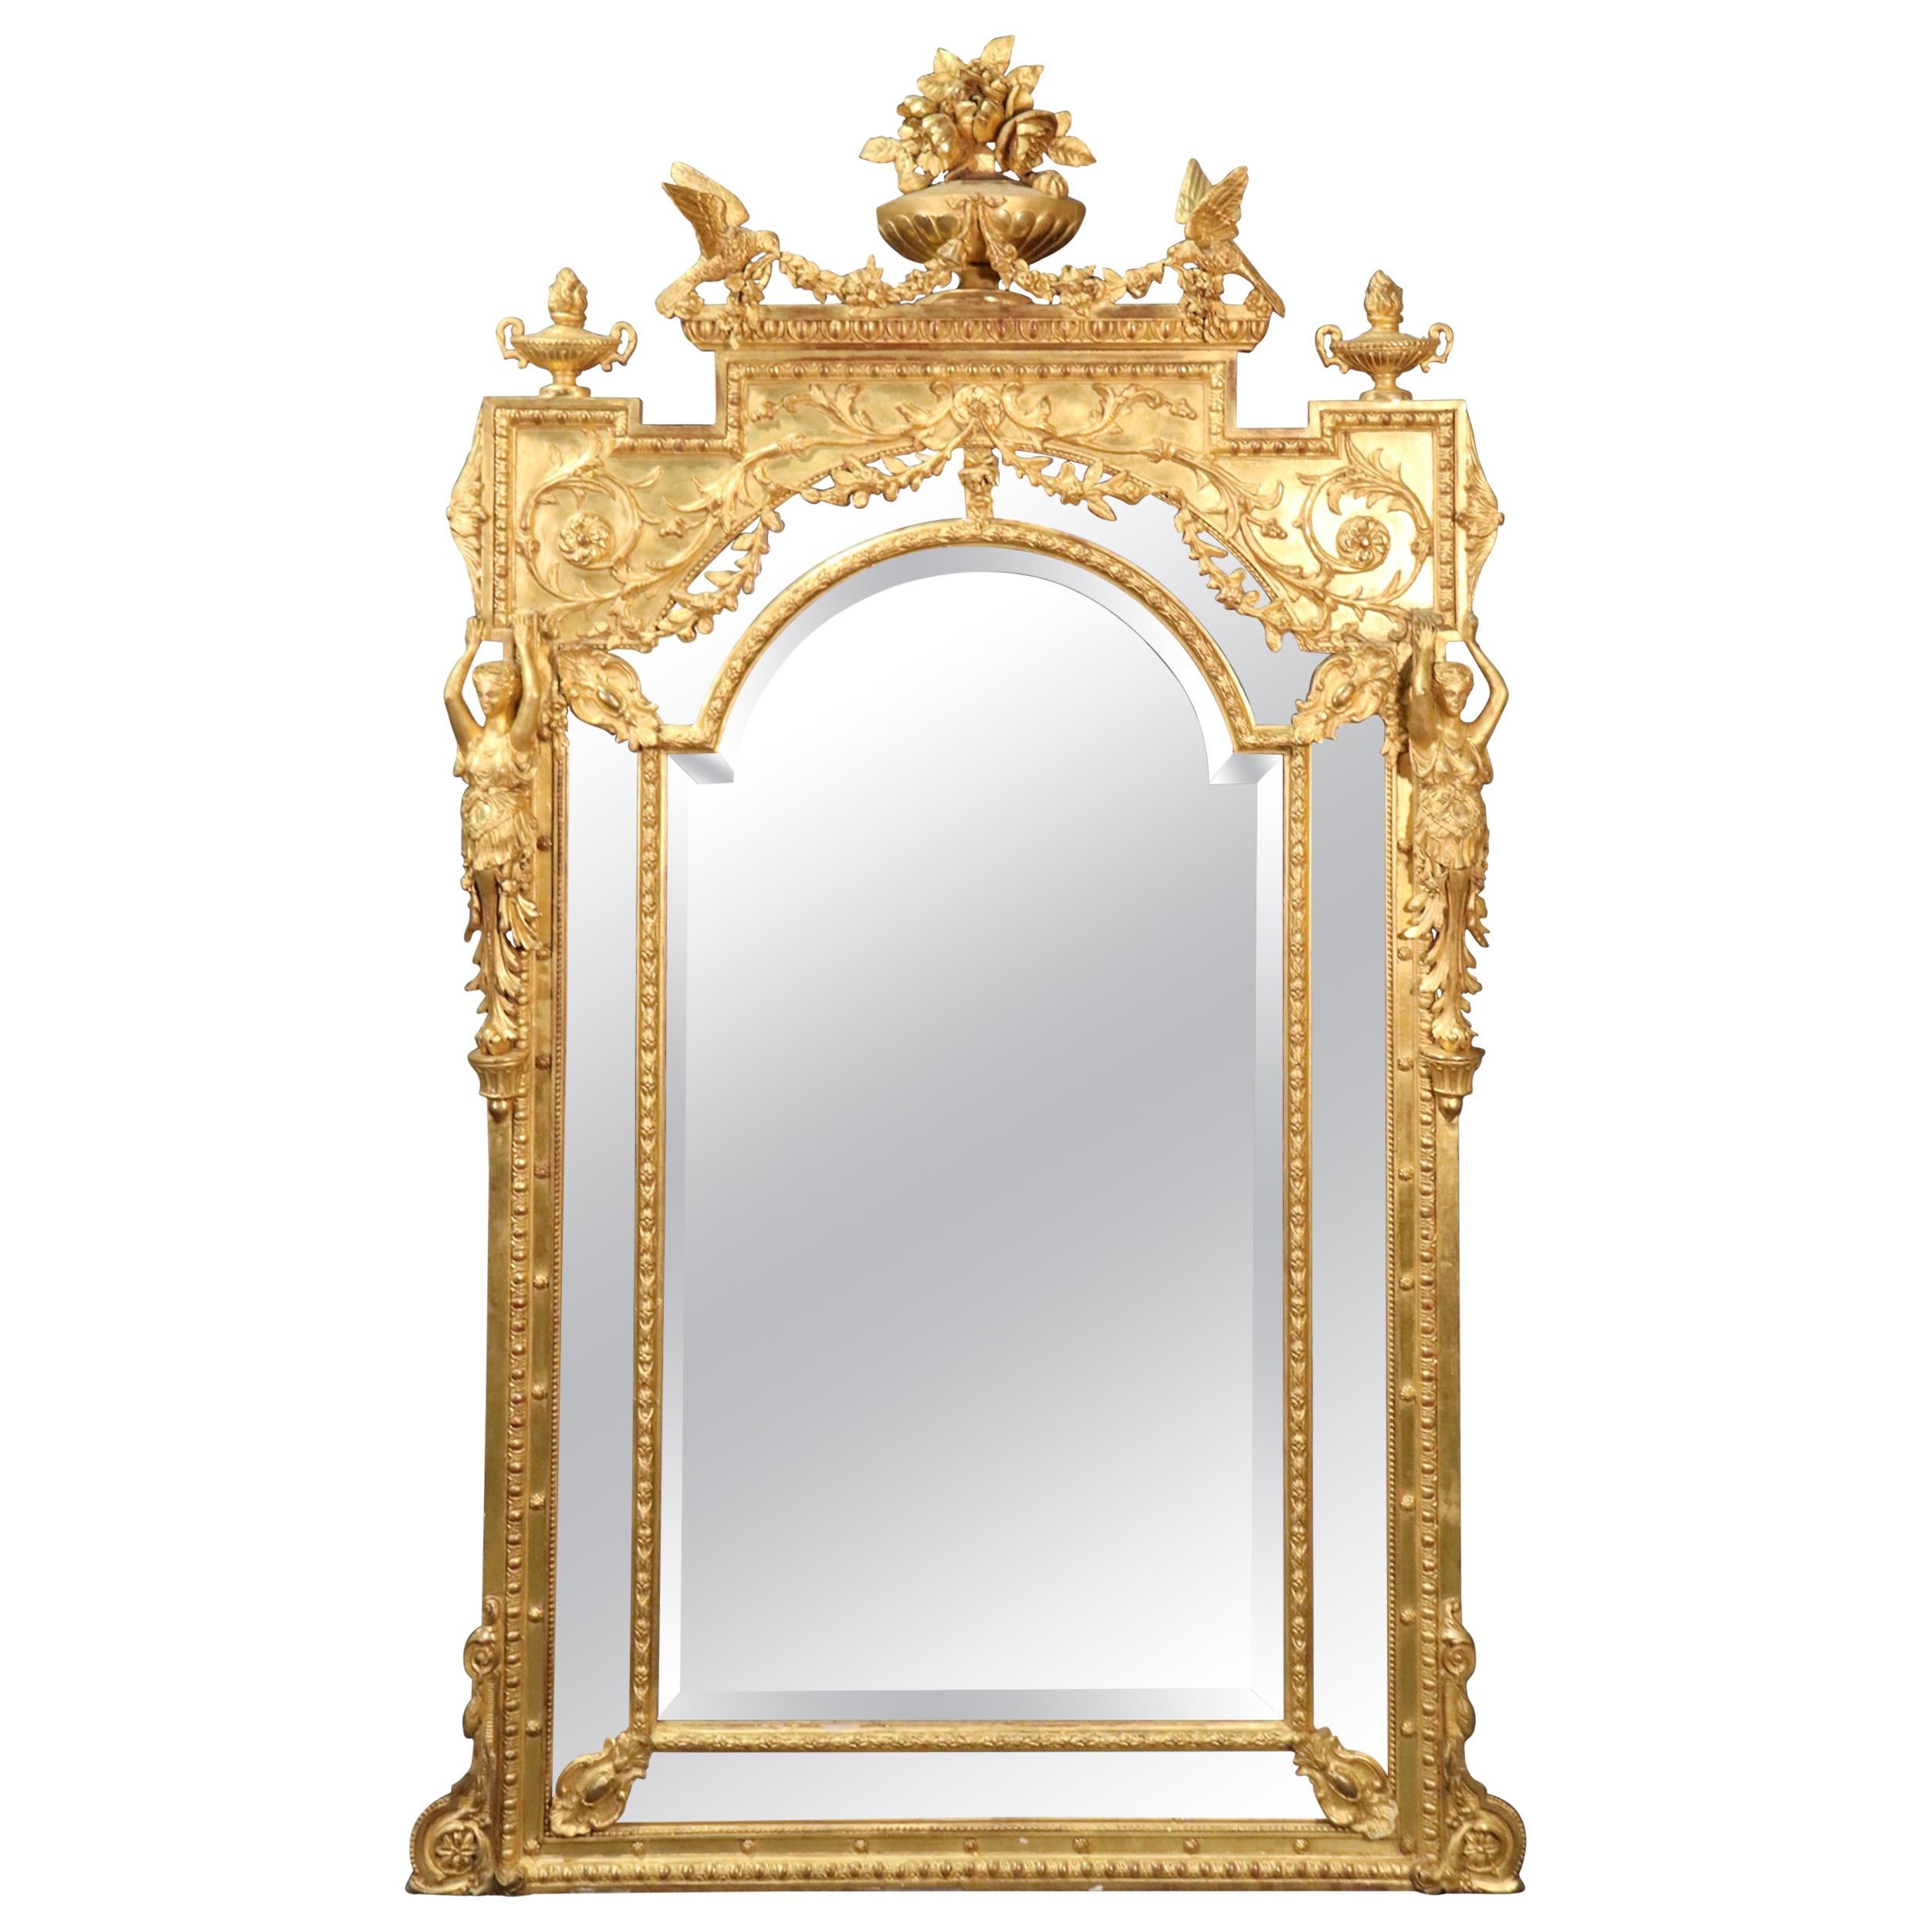 Monumental Giltwood French Regence Figural Mirror with Maidens and Birds